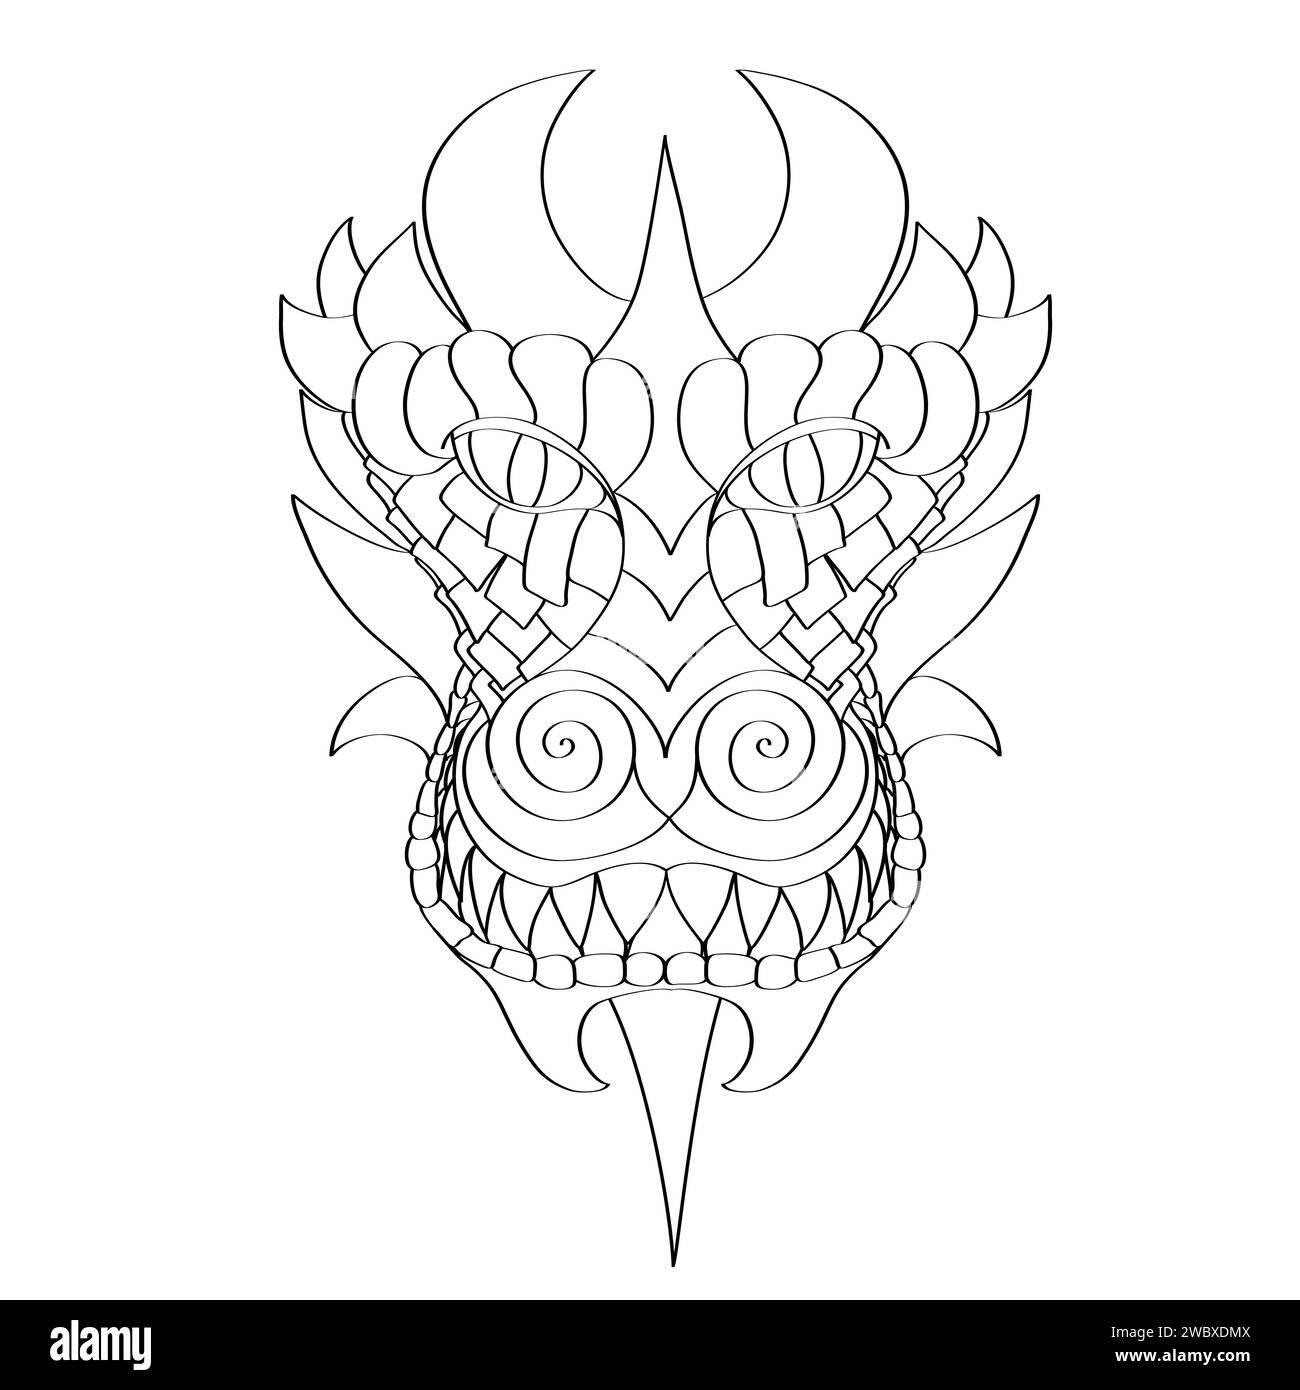 Fantasy dragon. Symbol of the New Year in the Chinese calendar. Outline illustration. Stock Vector